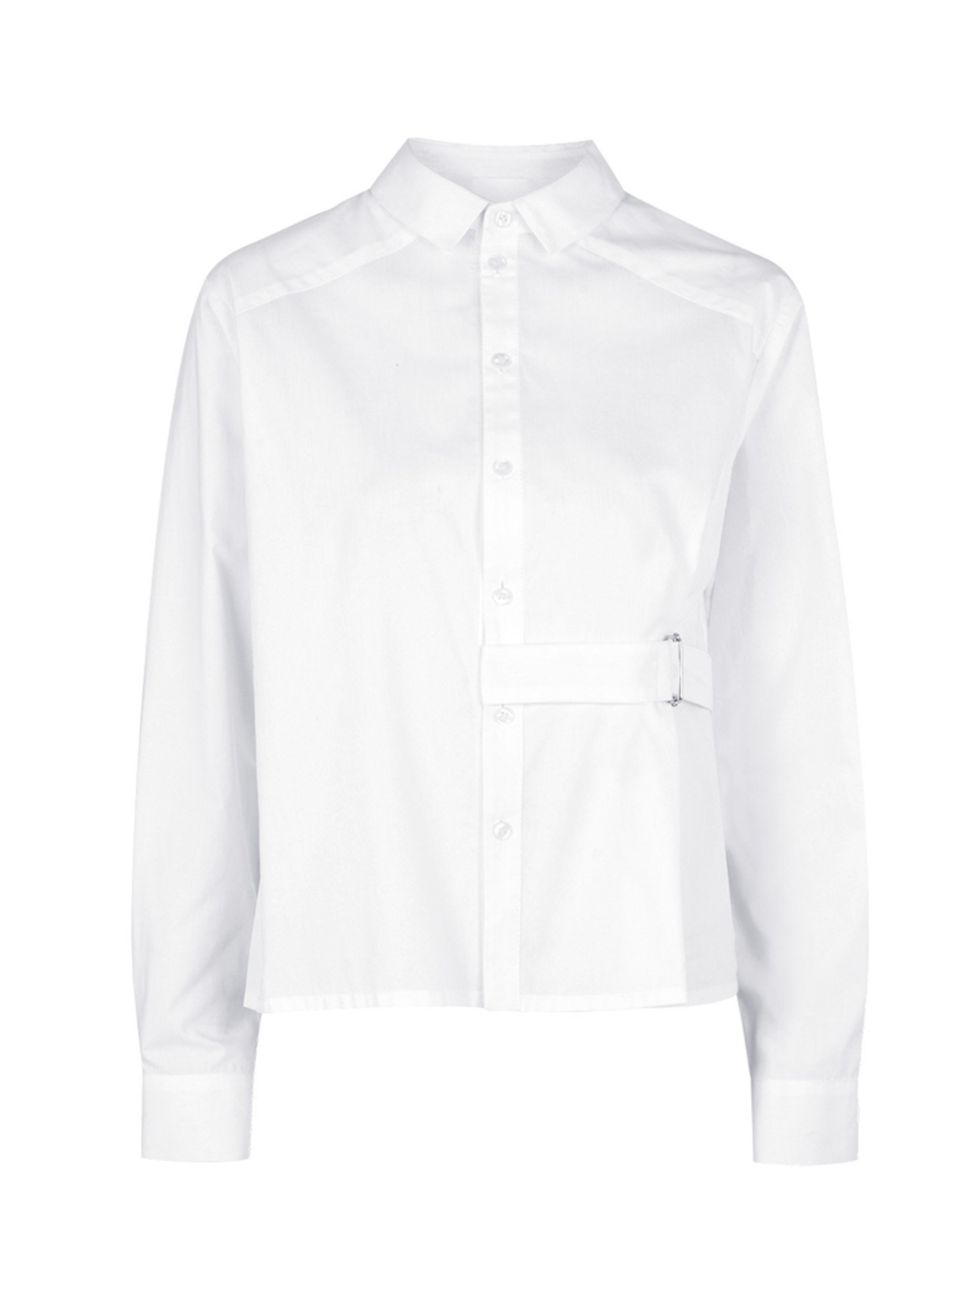 <p><a href="http://www.topshop.com/en/tsuk/product/new-in-this-week-2169932/belted-cotton-blend-shirt-by-boutique-4207684?bi=1&ps=200" target="_blank">Topshop Boutique</a> shirt, £60</p>